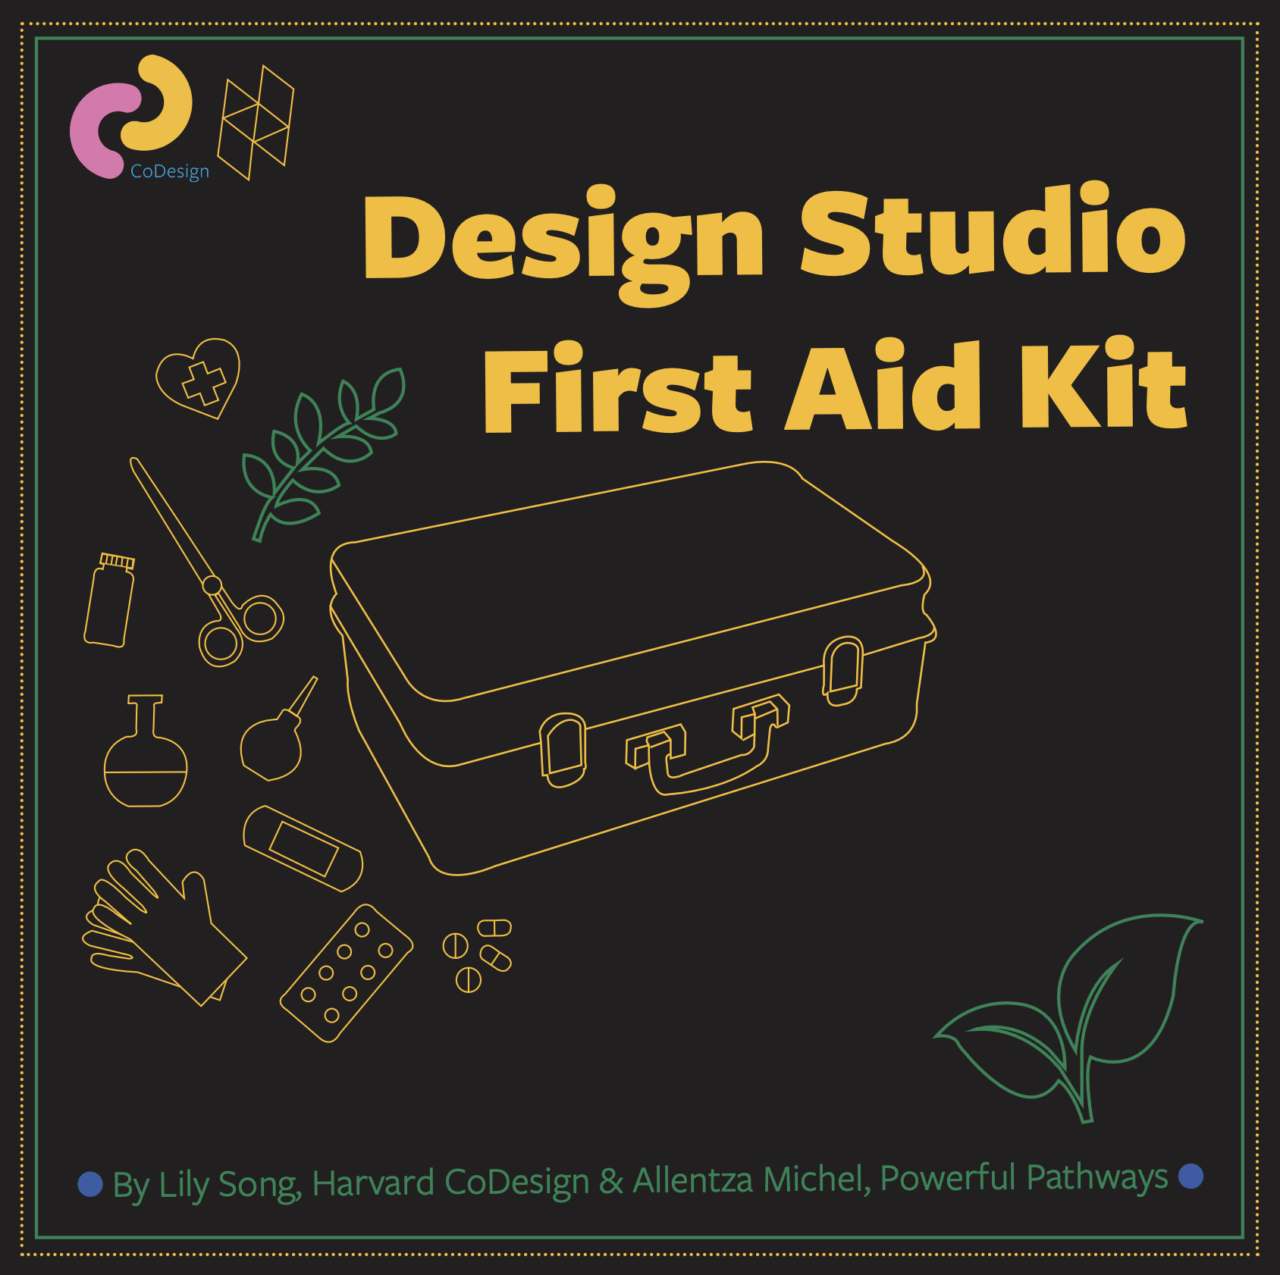 Illustration of The cover of GSD CoDesign’s Design Studio First Aid Kit